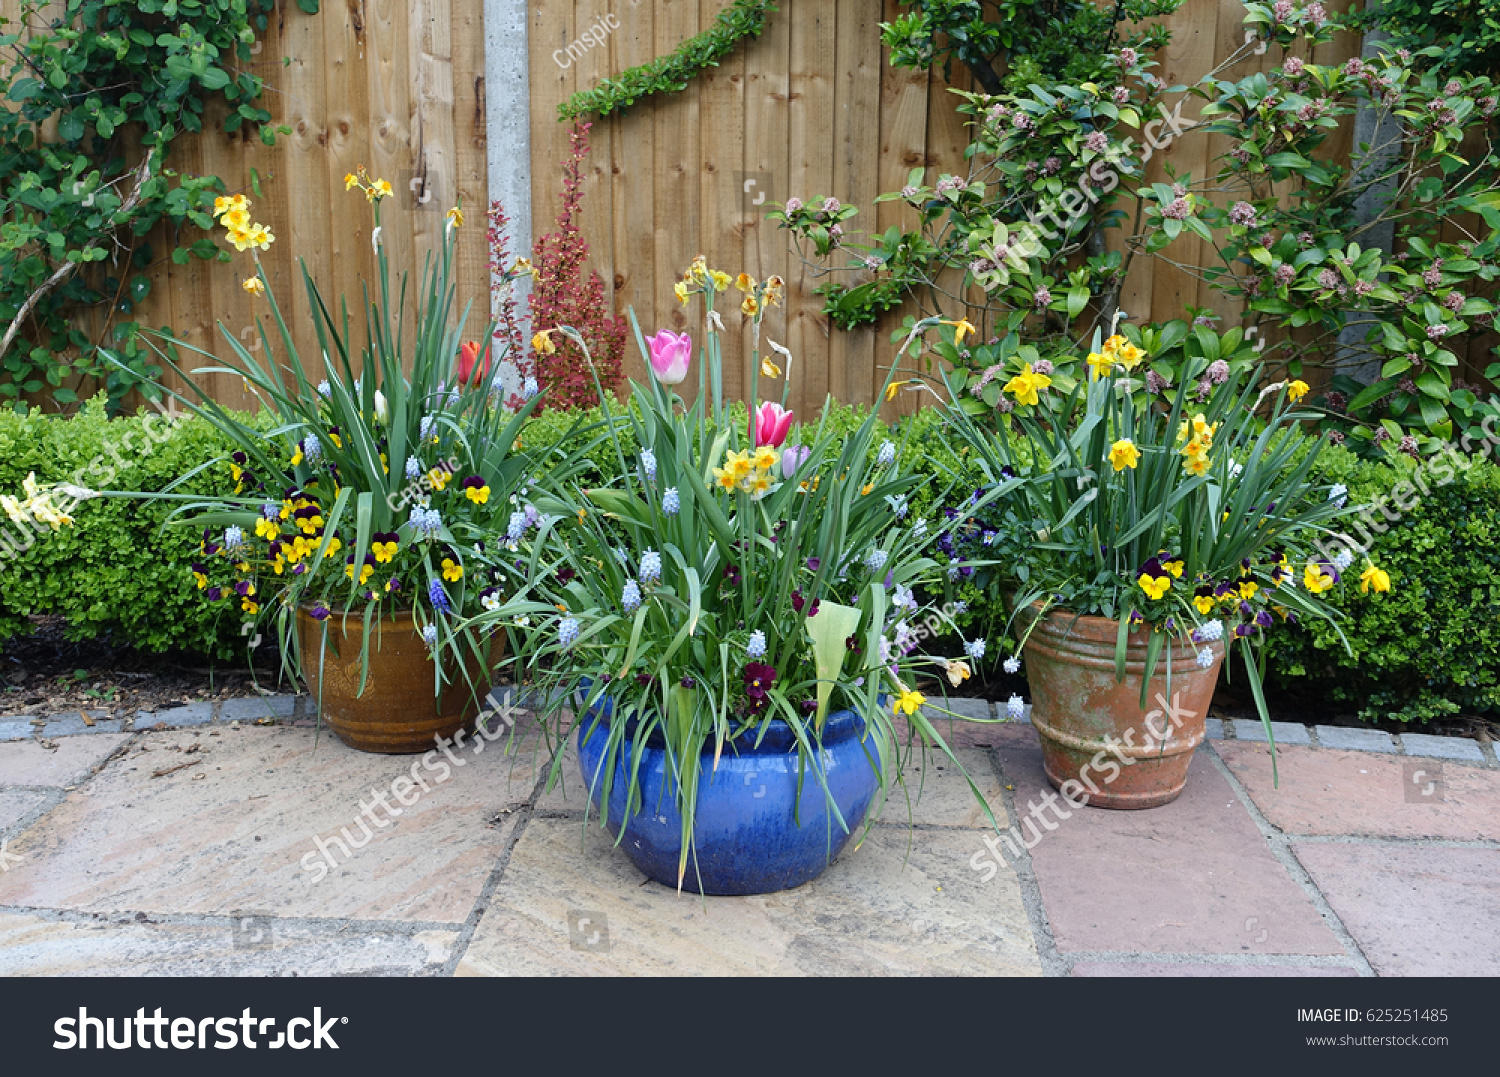 Pots containing spring flowers on a patio                       #625251485